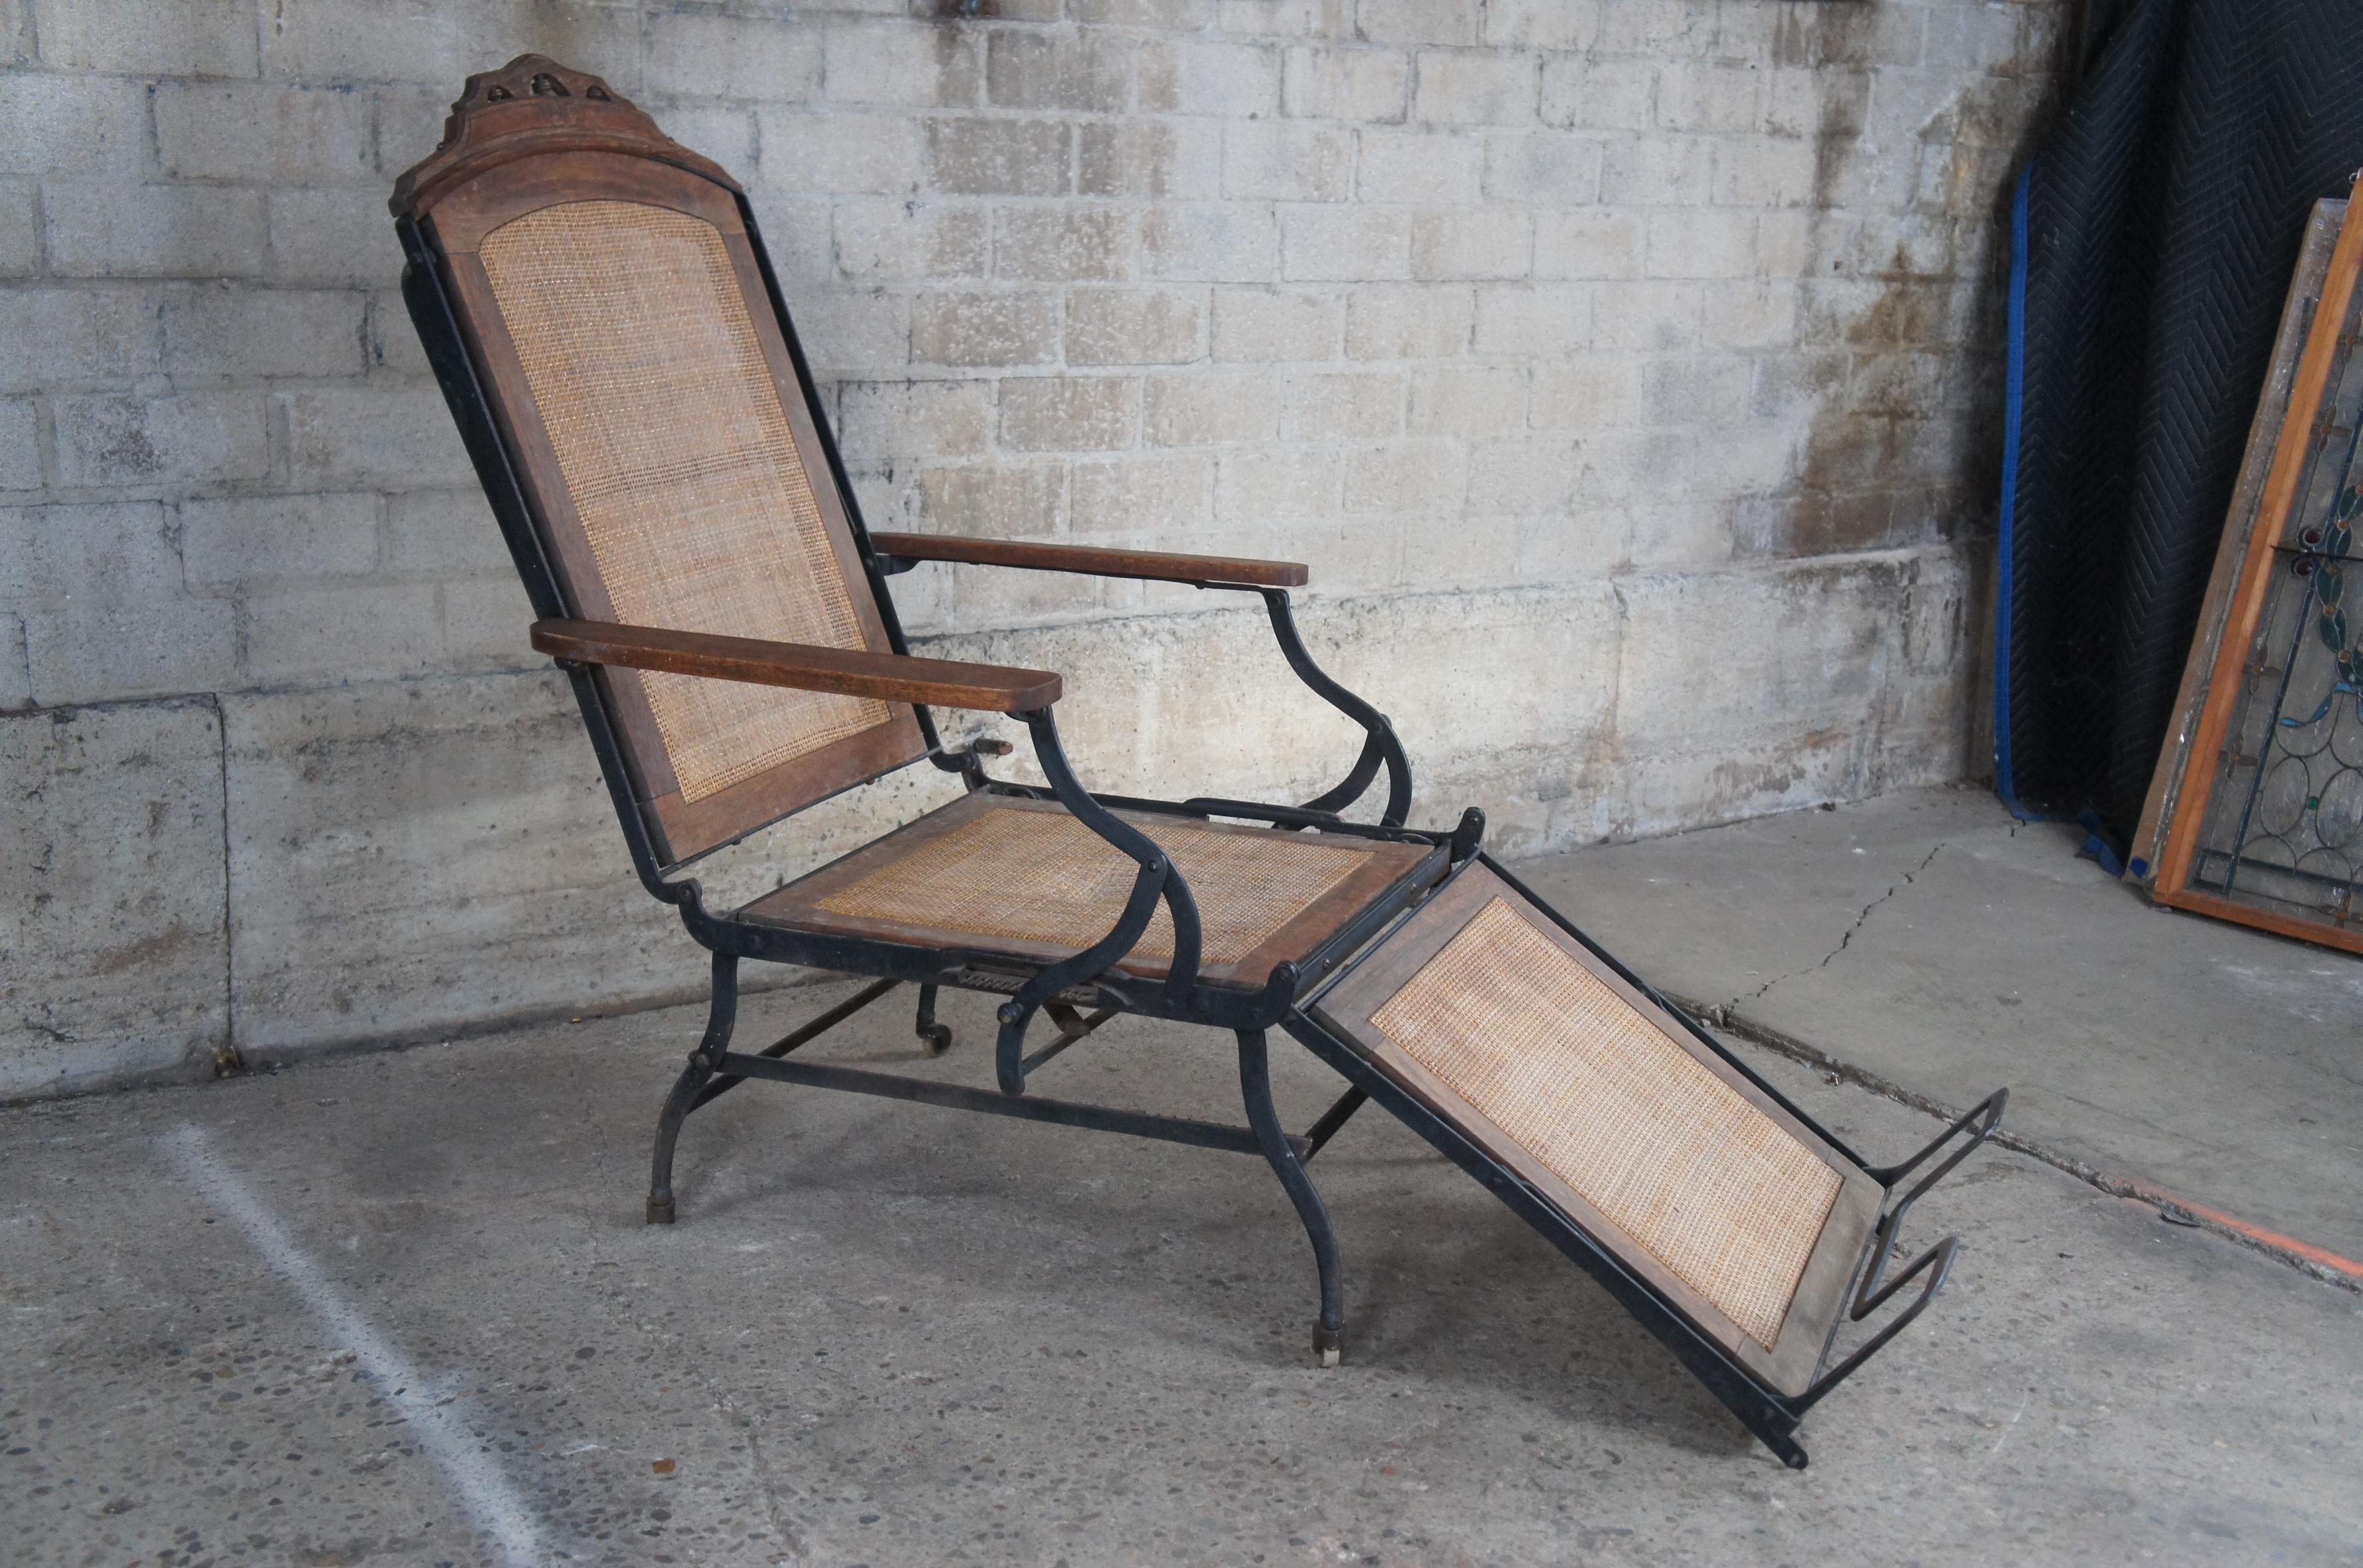 19th Century Marks A.F. Chair Co. New York Pat 1876 Walnut Campaign Lounge Chair Eastlake